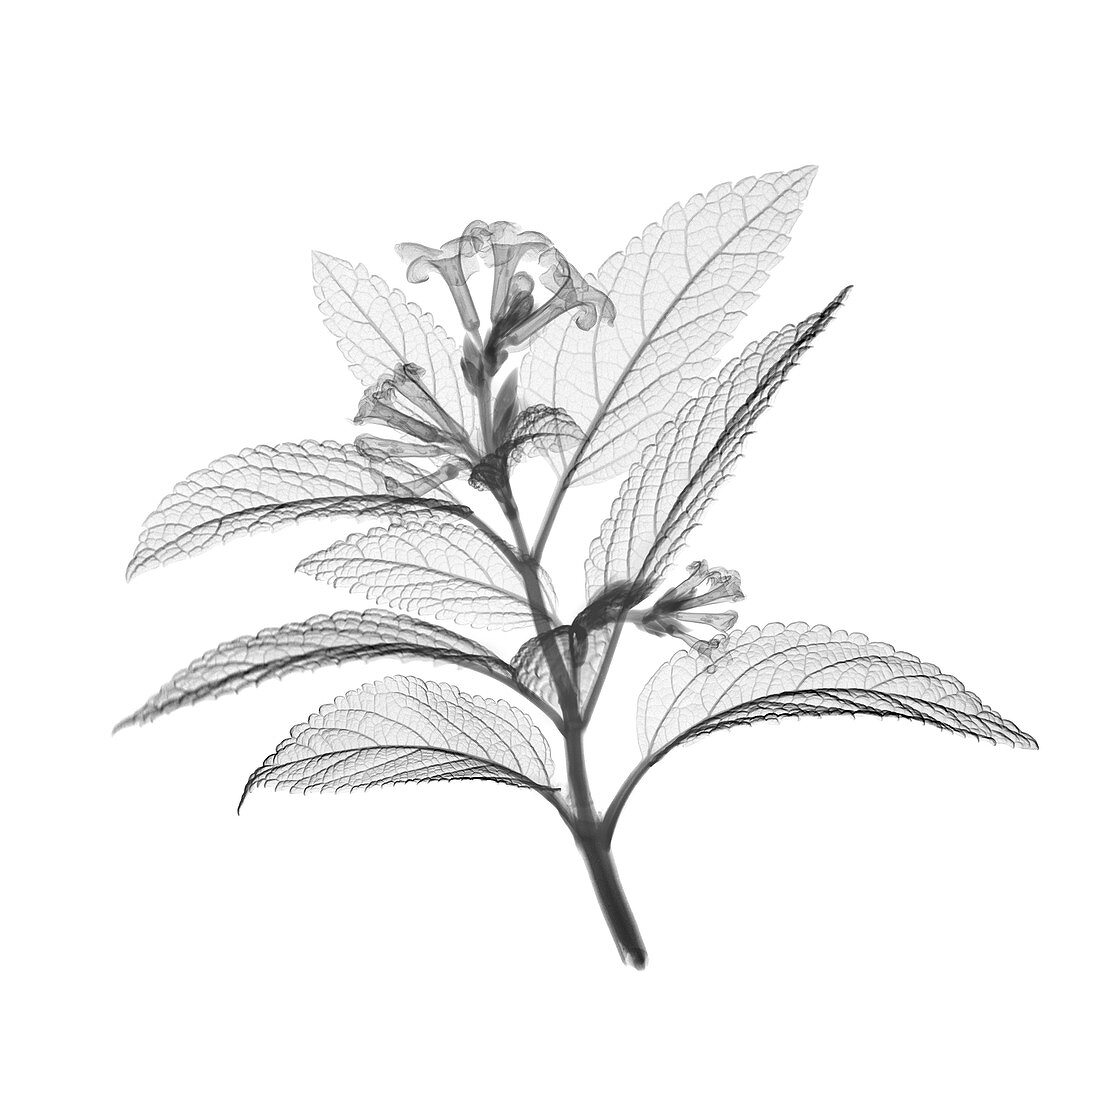 Mountain pepper plant and flower (Litsea sp.), X-ray